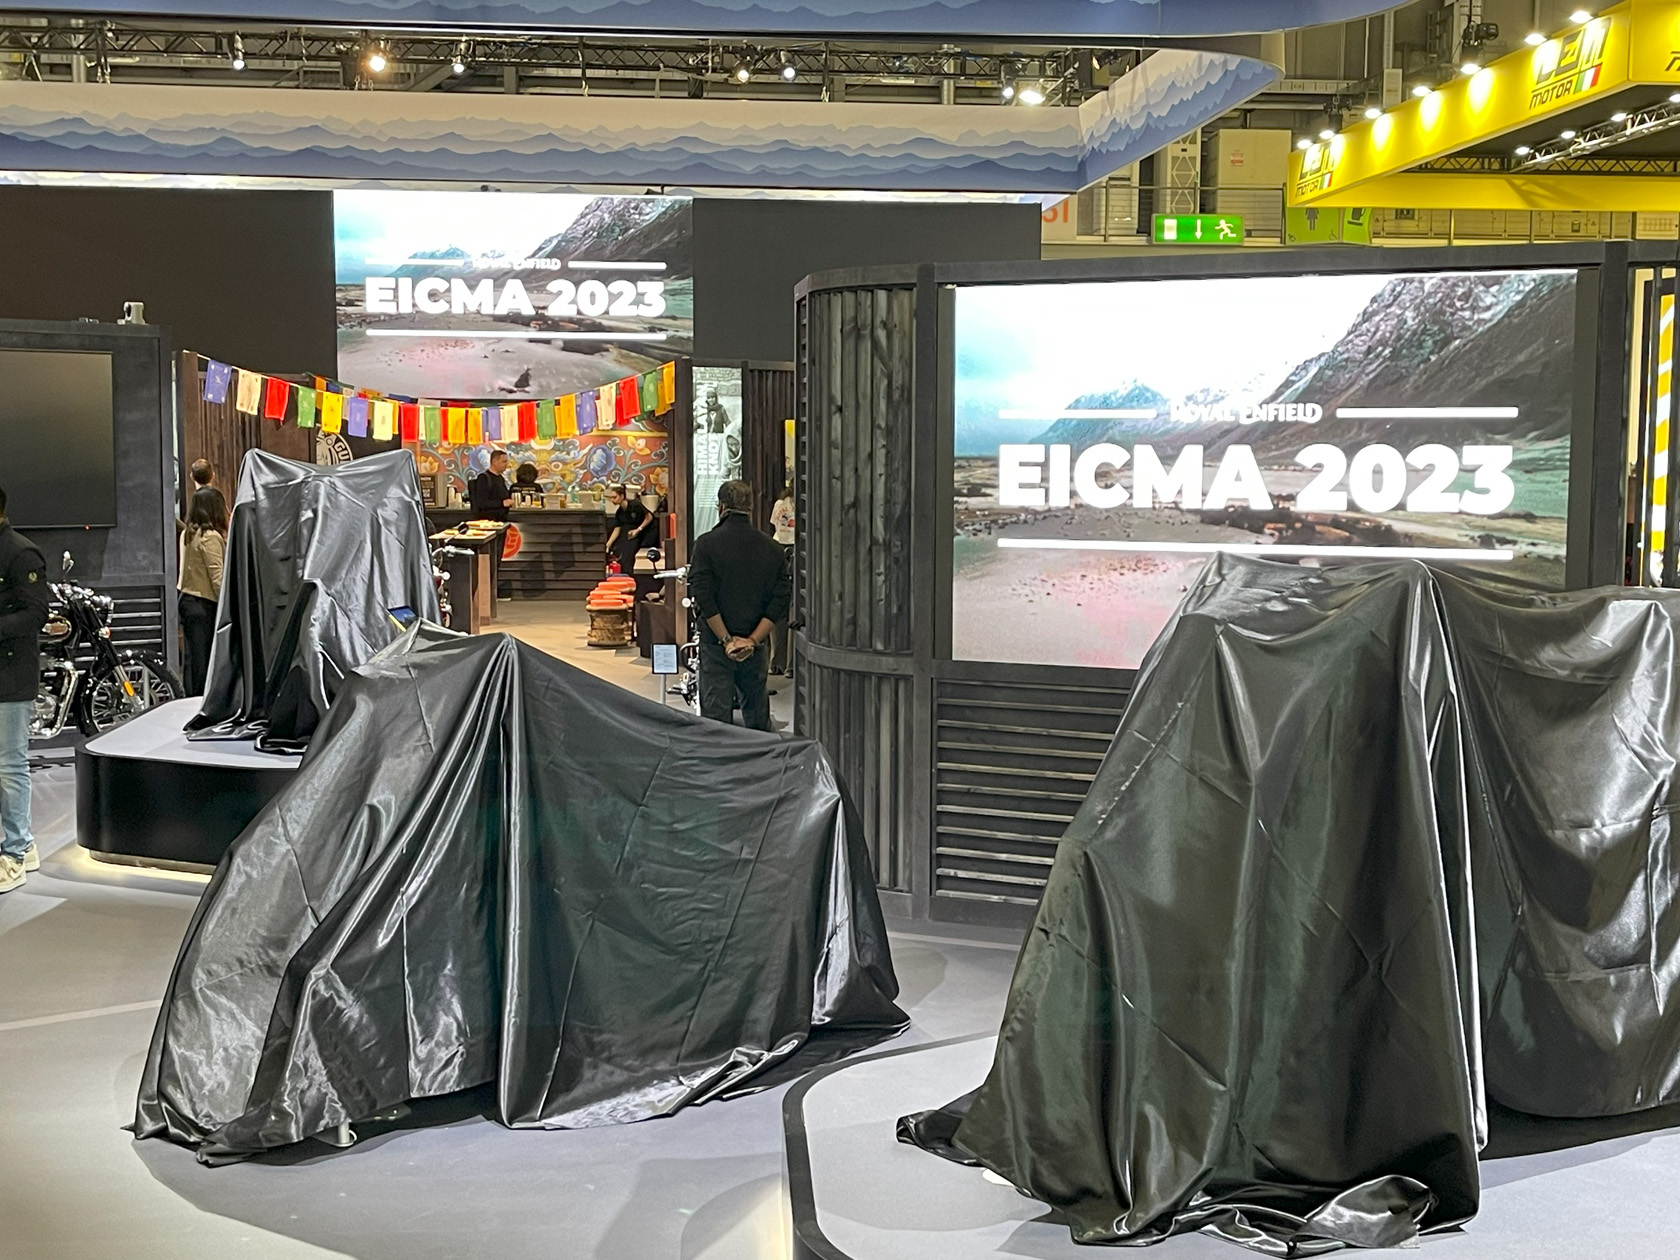 Royal Enfield stand at EICMA 2023 - with motorcycles under covers